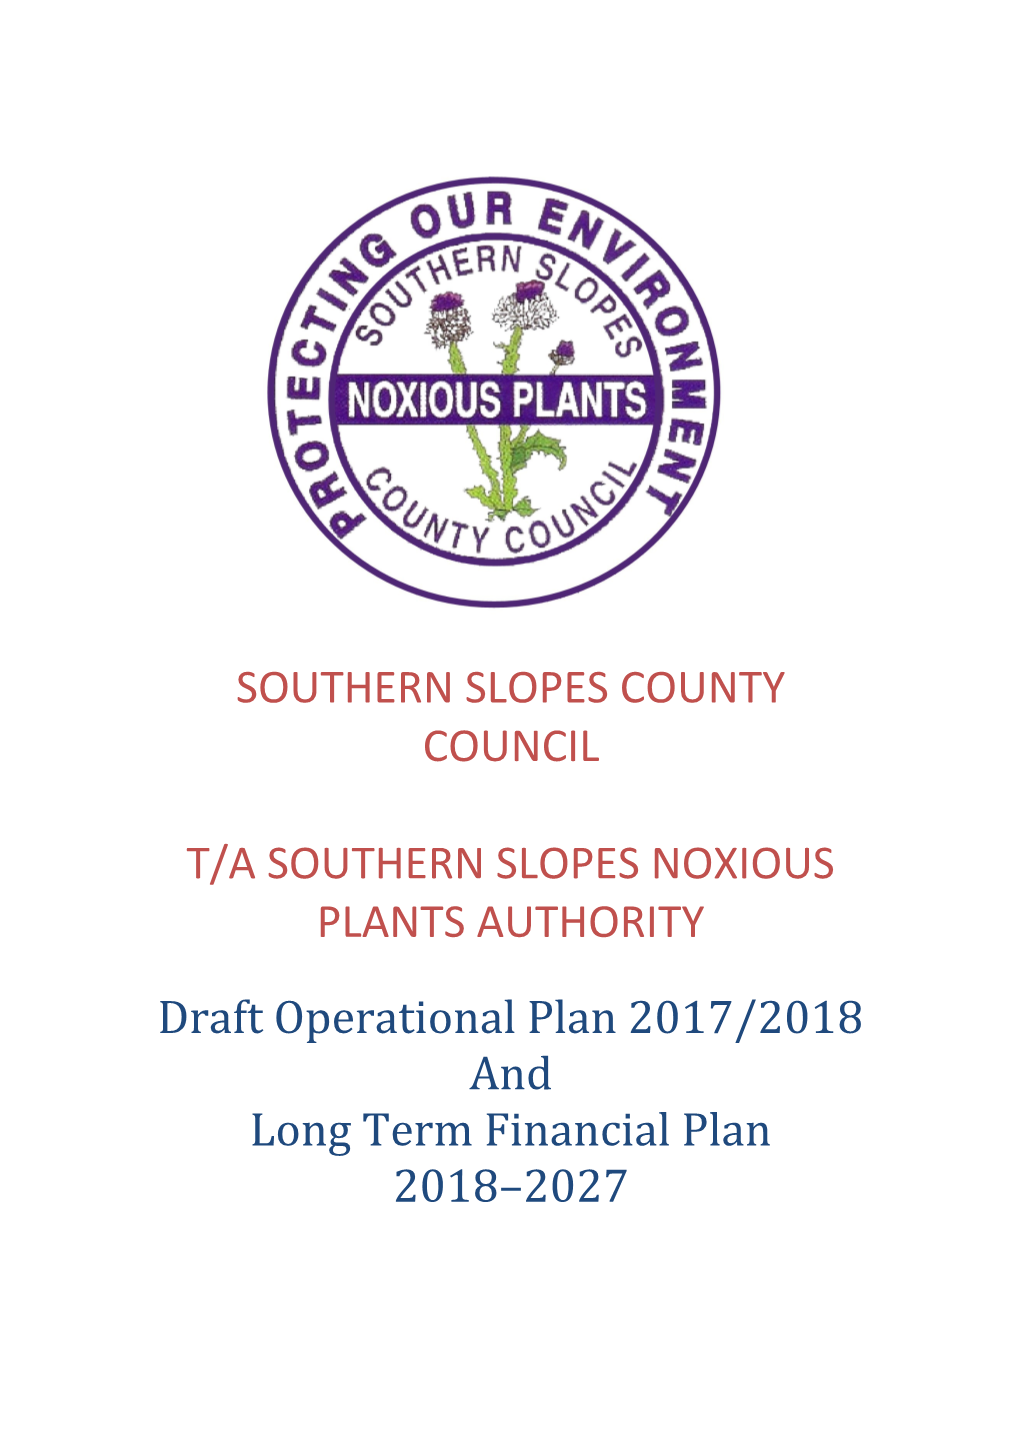 Southern Slopes County Council